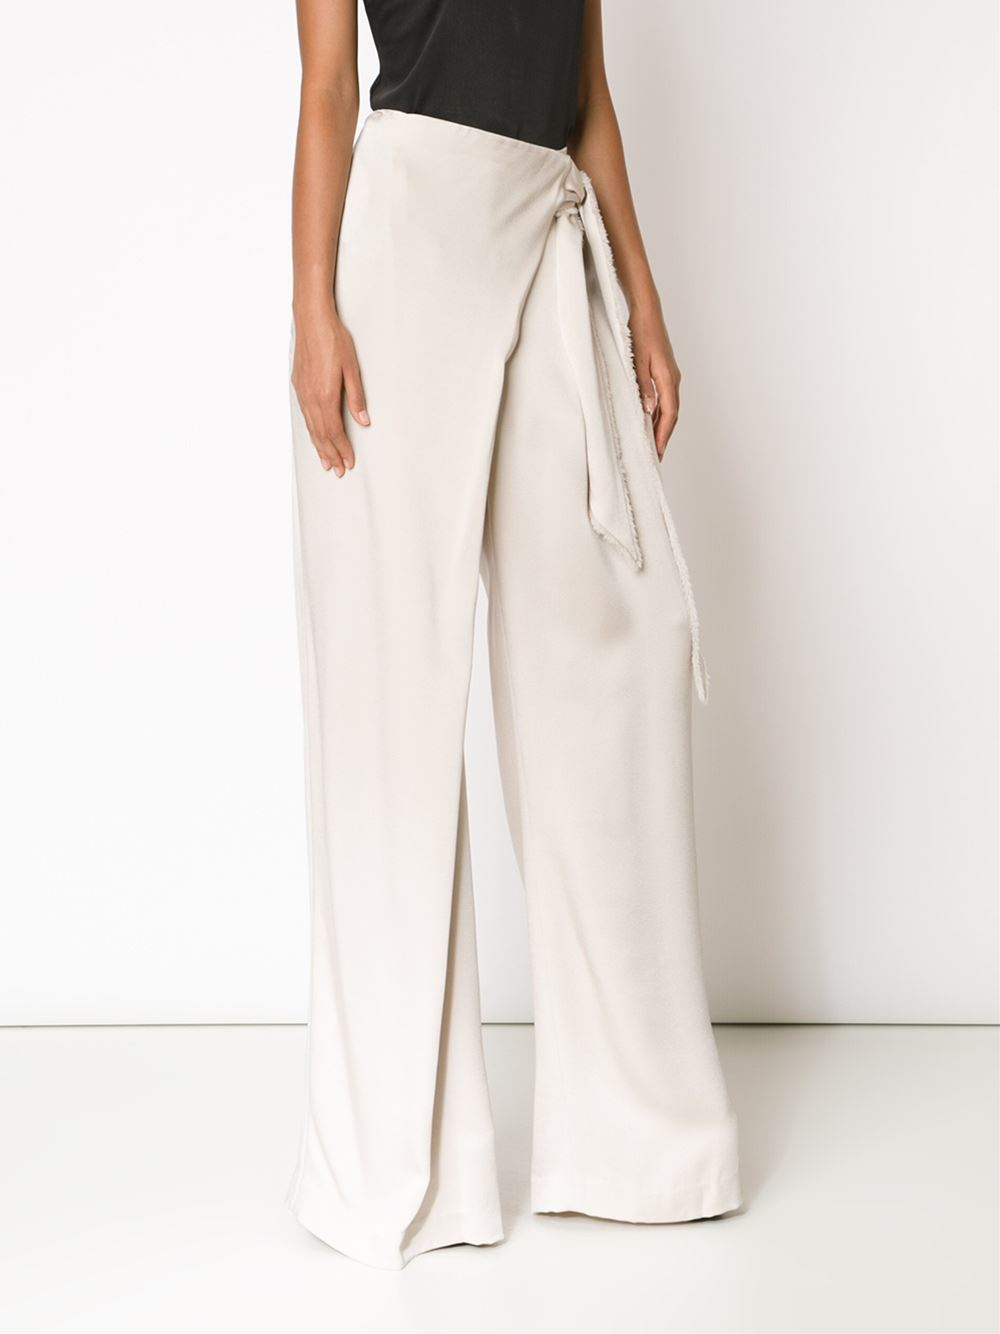 Maiyet Wrap Palazzo Pants in Natural - Lyst